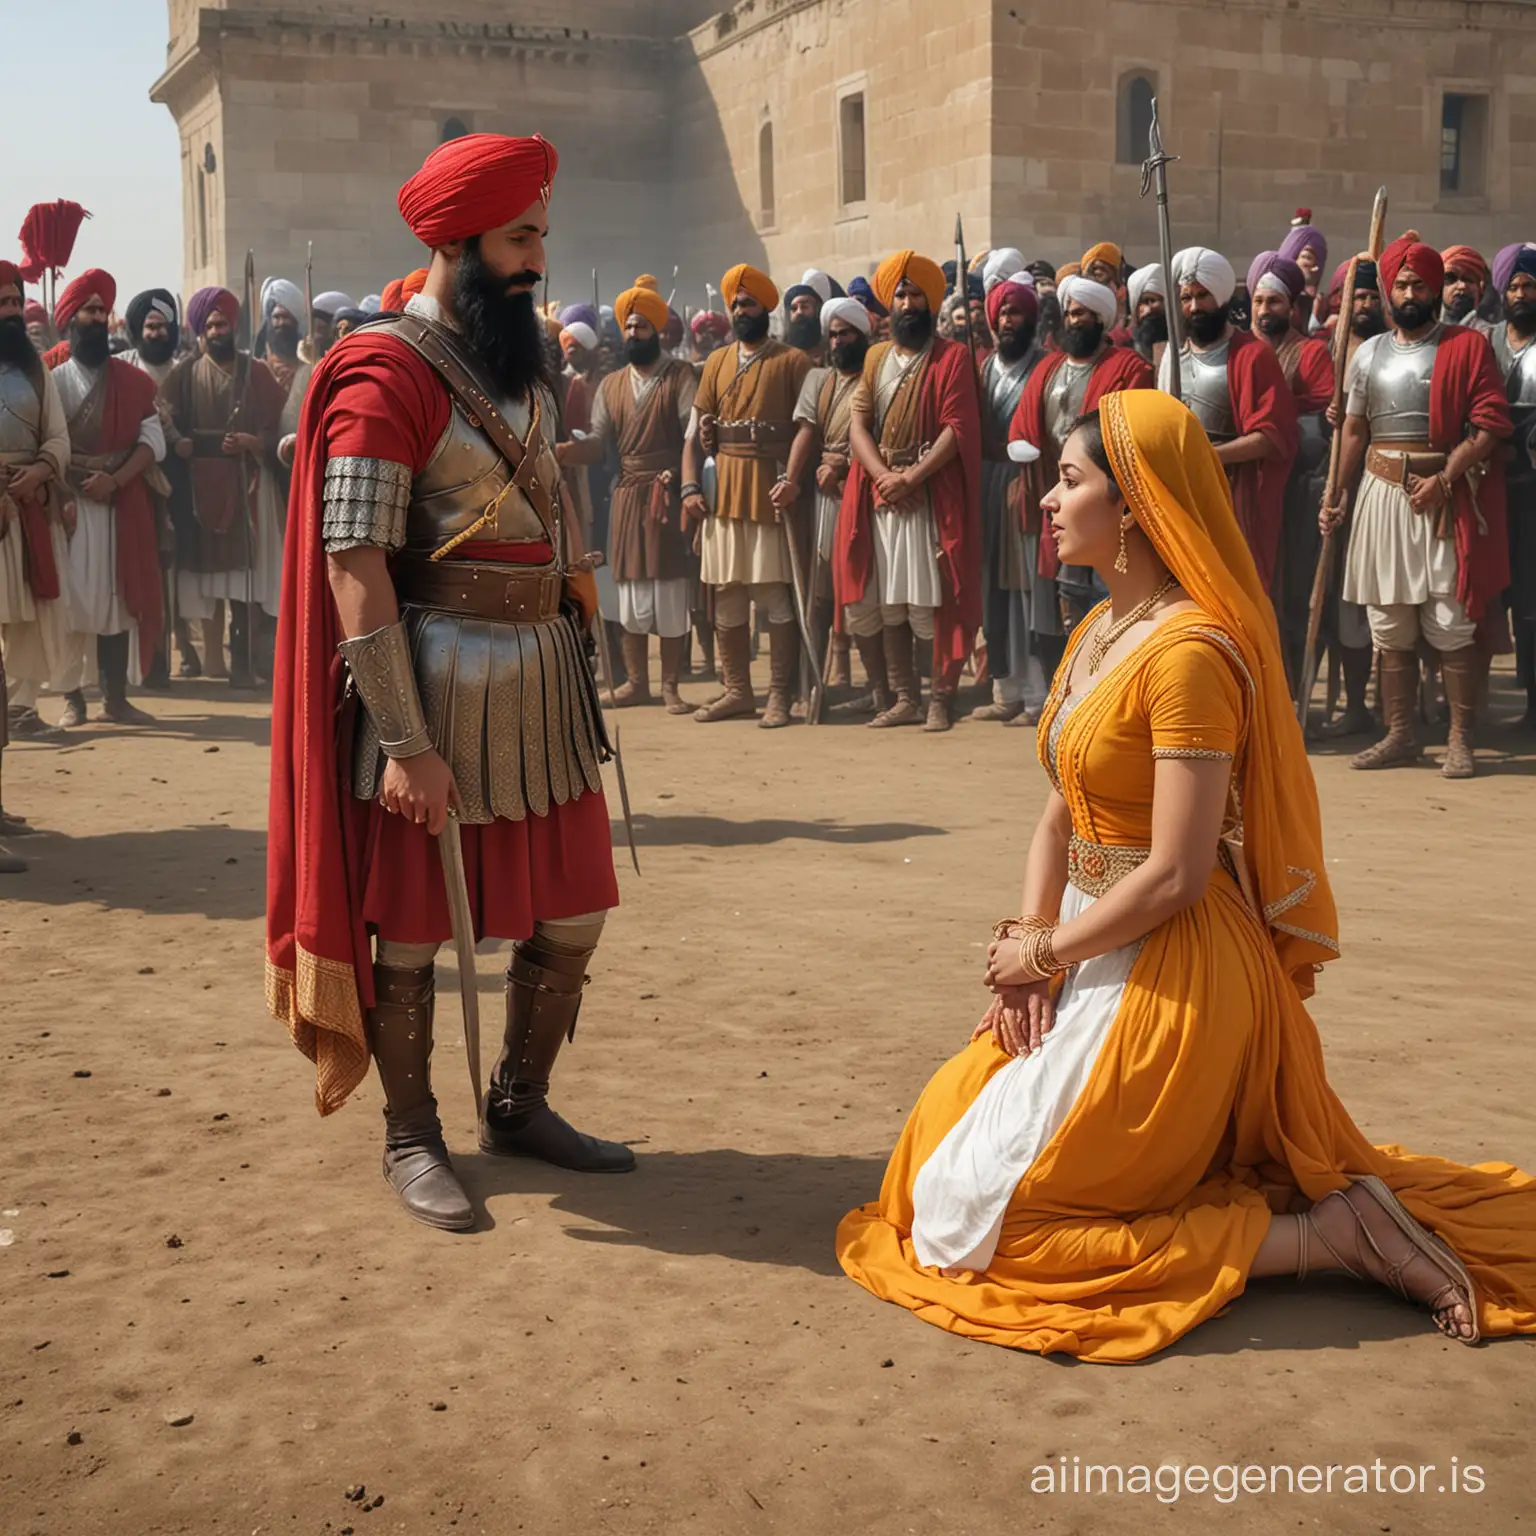 Sikh Princess kneels before Roman soldier begging for mercy